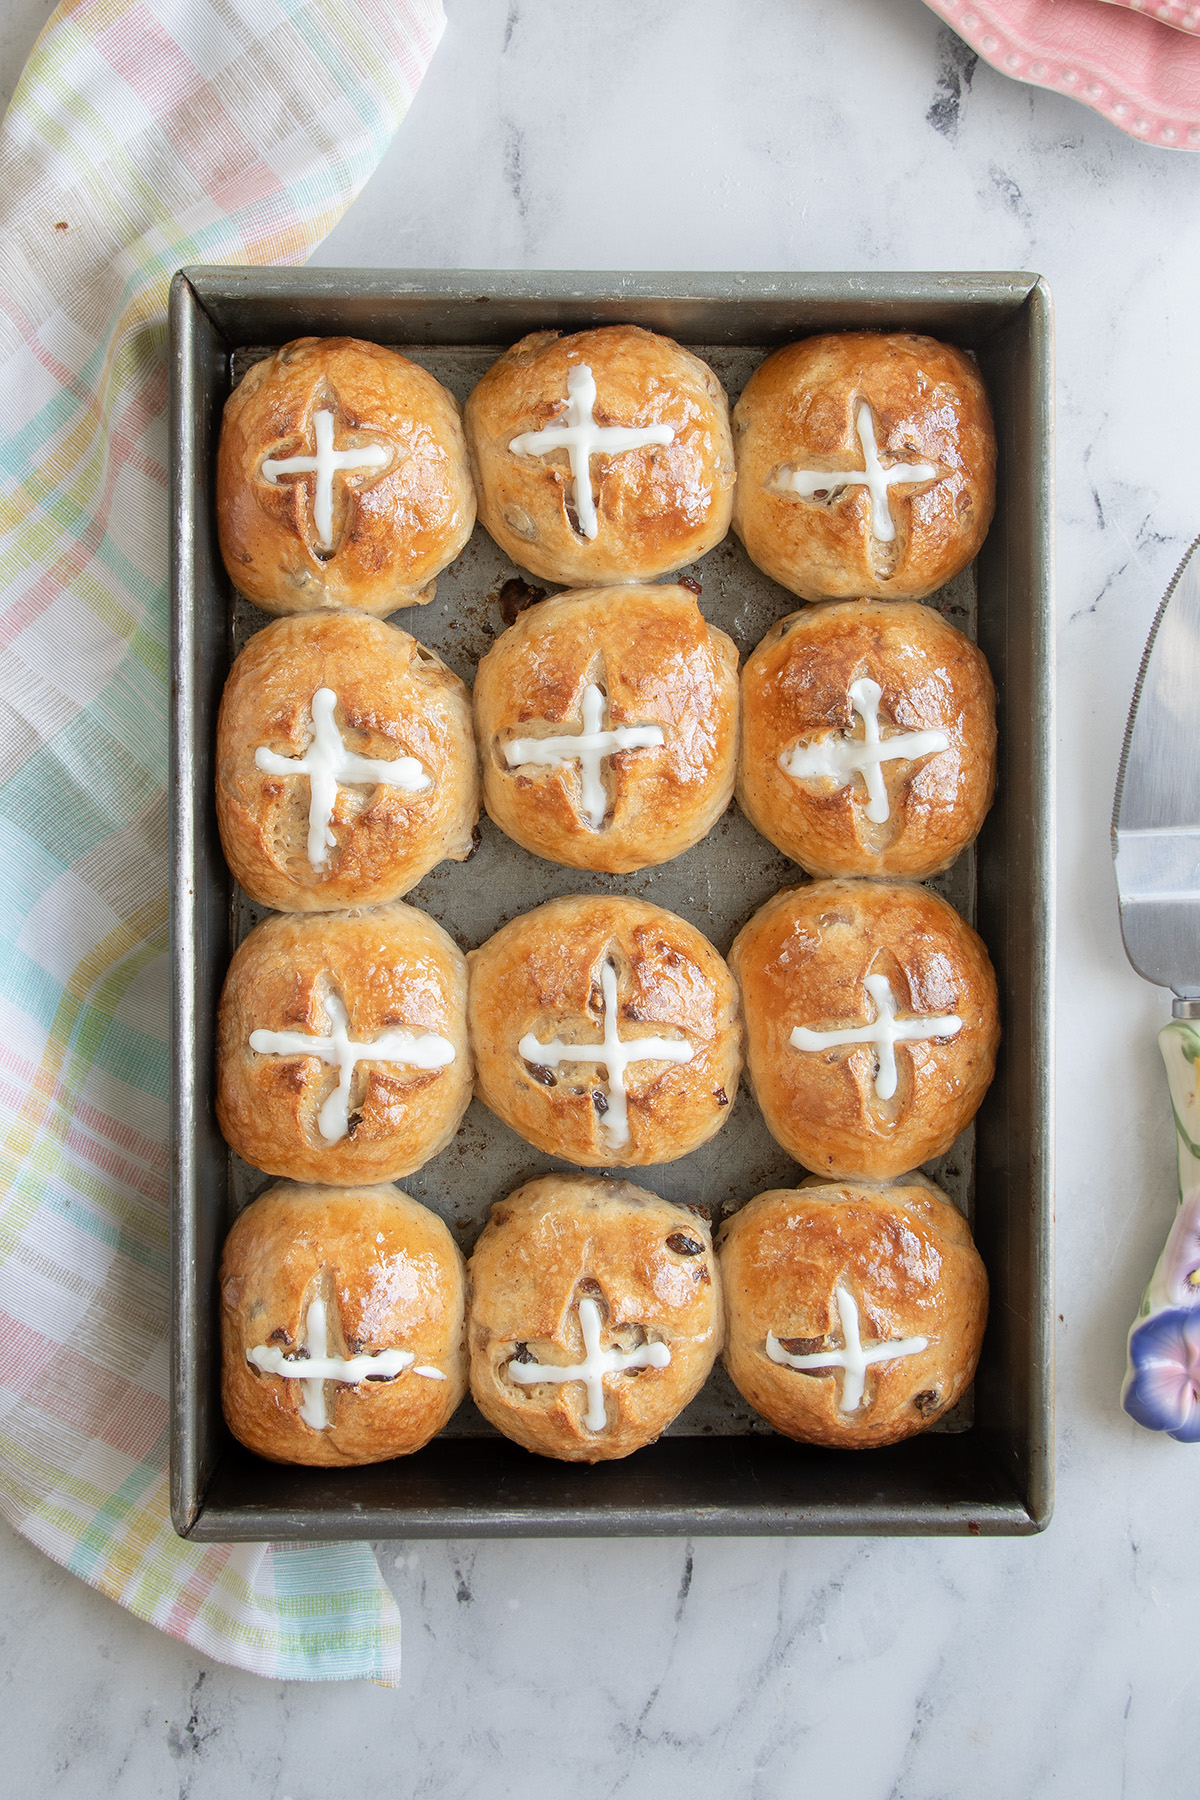 a pan filled with hot cross buns.